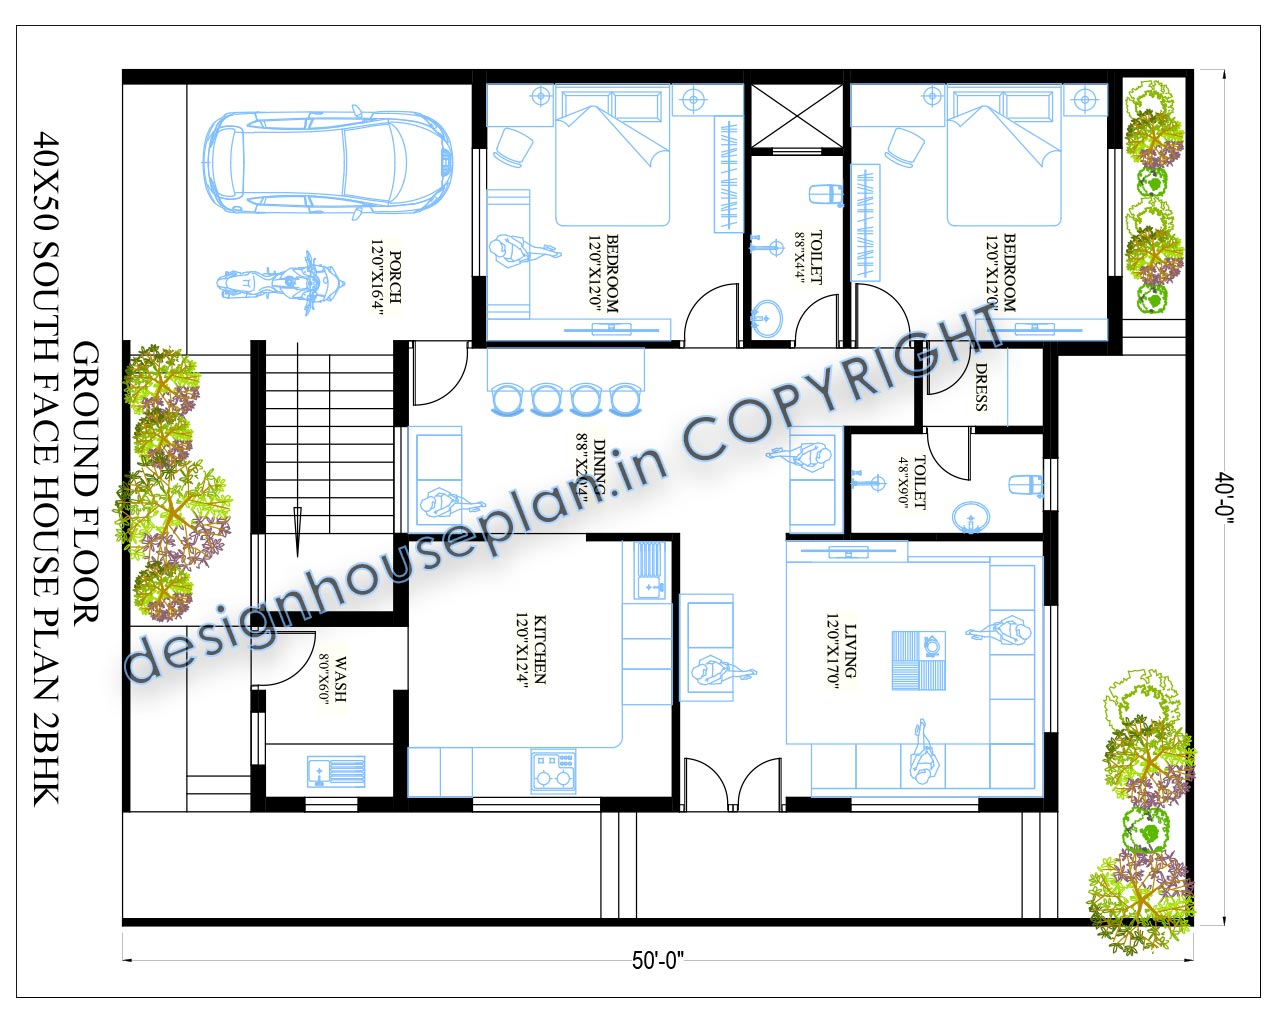 This is a south-facing 2 bedroom modern house design with a parking area.